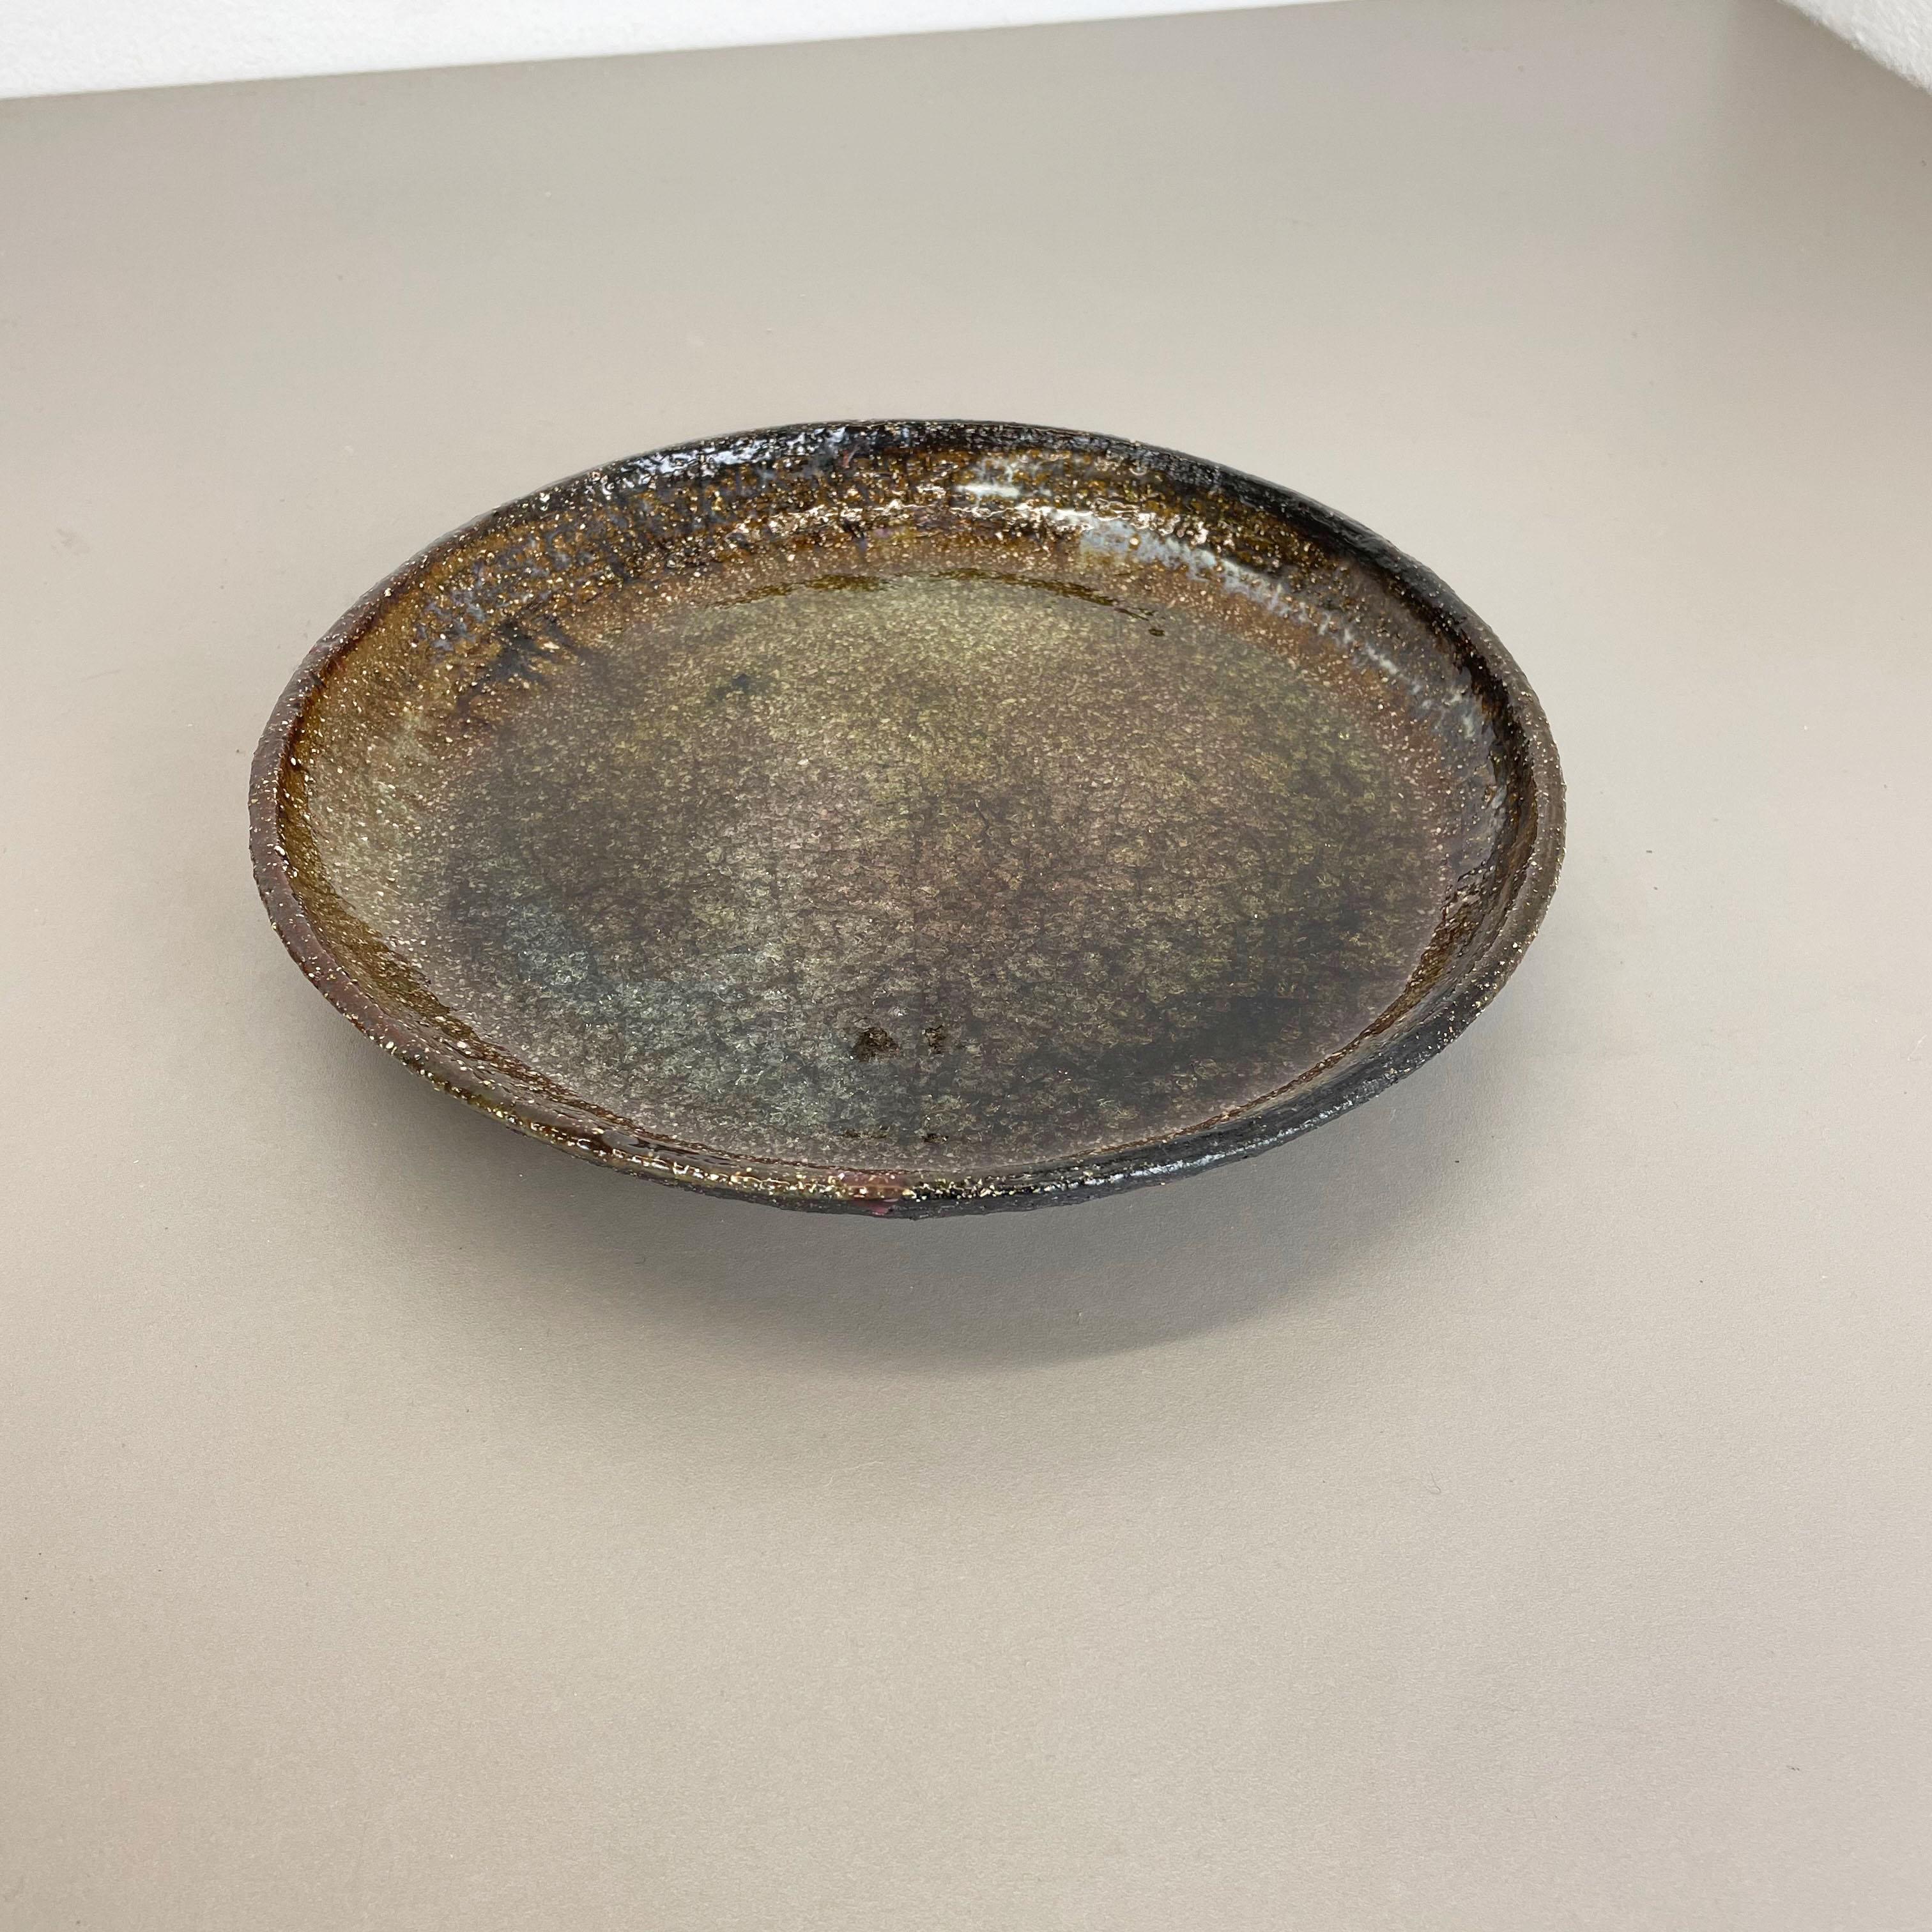 Mid-Century Modern Ceramic Studio Pottery Bowl Shell Element by Gerhard Liebenthron, Germany, 1970s For Sale